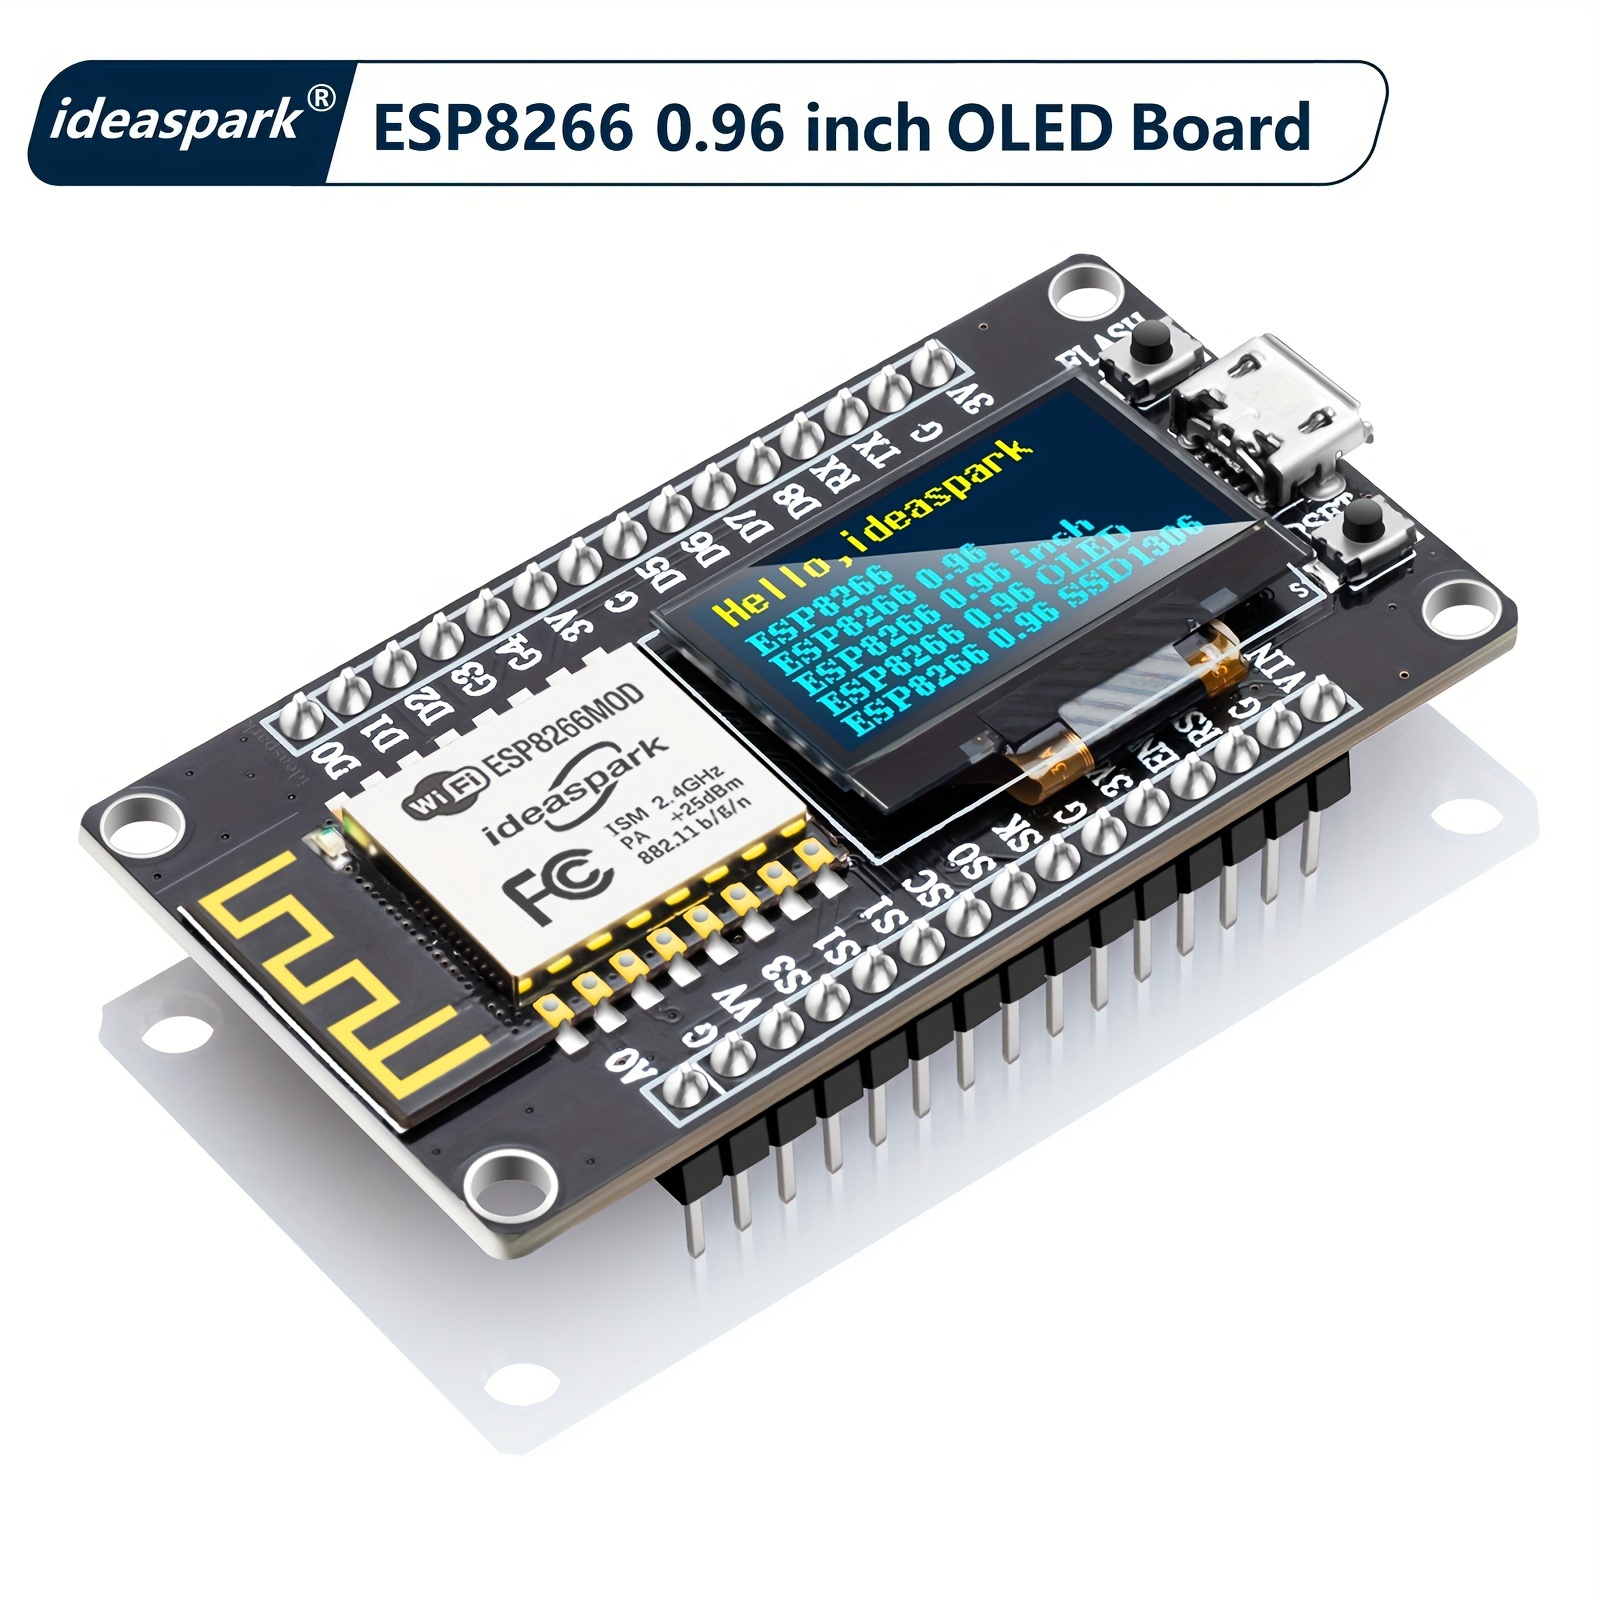 

Esp8266 Development Board With 0.96 Inch Oled Display, Ch340 Driver, Esp-12e Wifi Wireless Module, And Micro Usb Works Great For Arduino Ide/micropython Programming (pin Header Soldered)